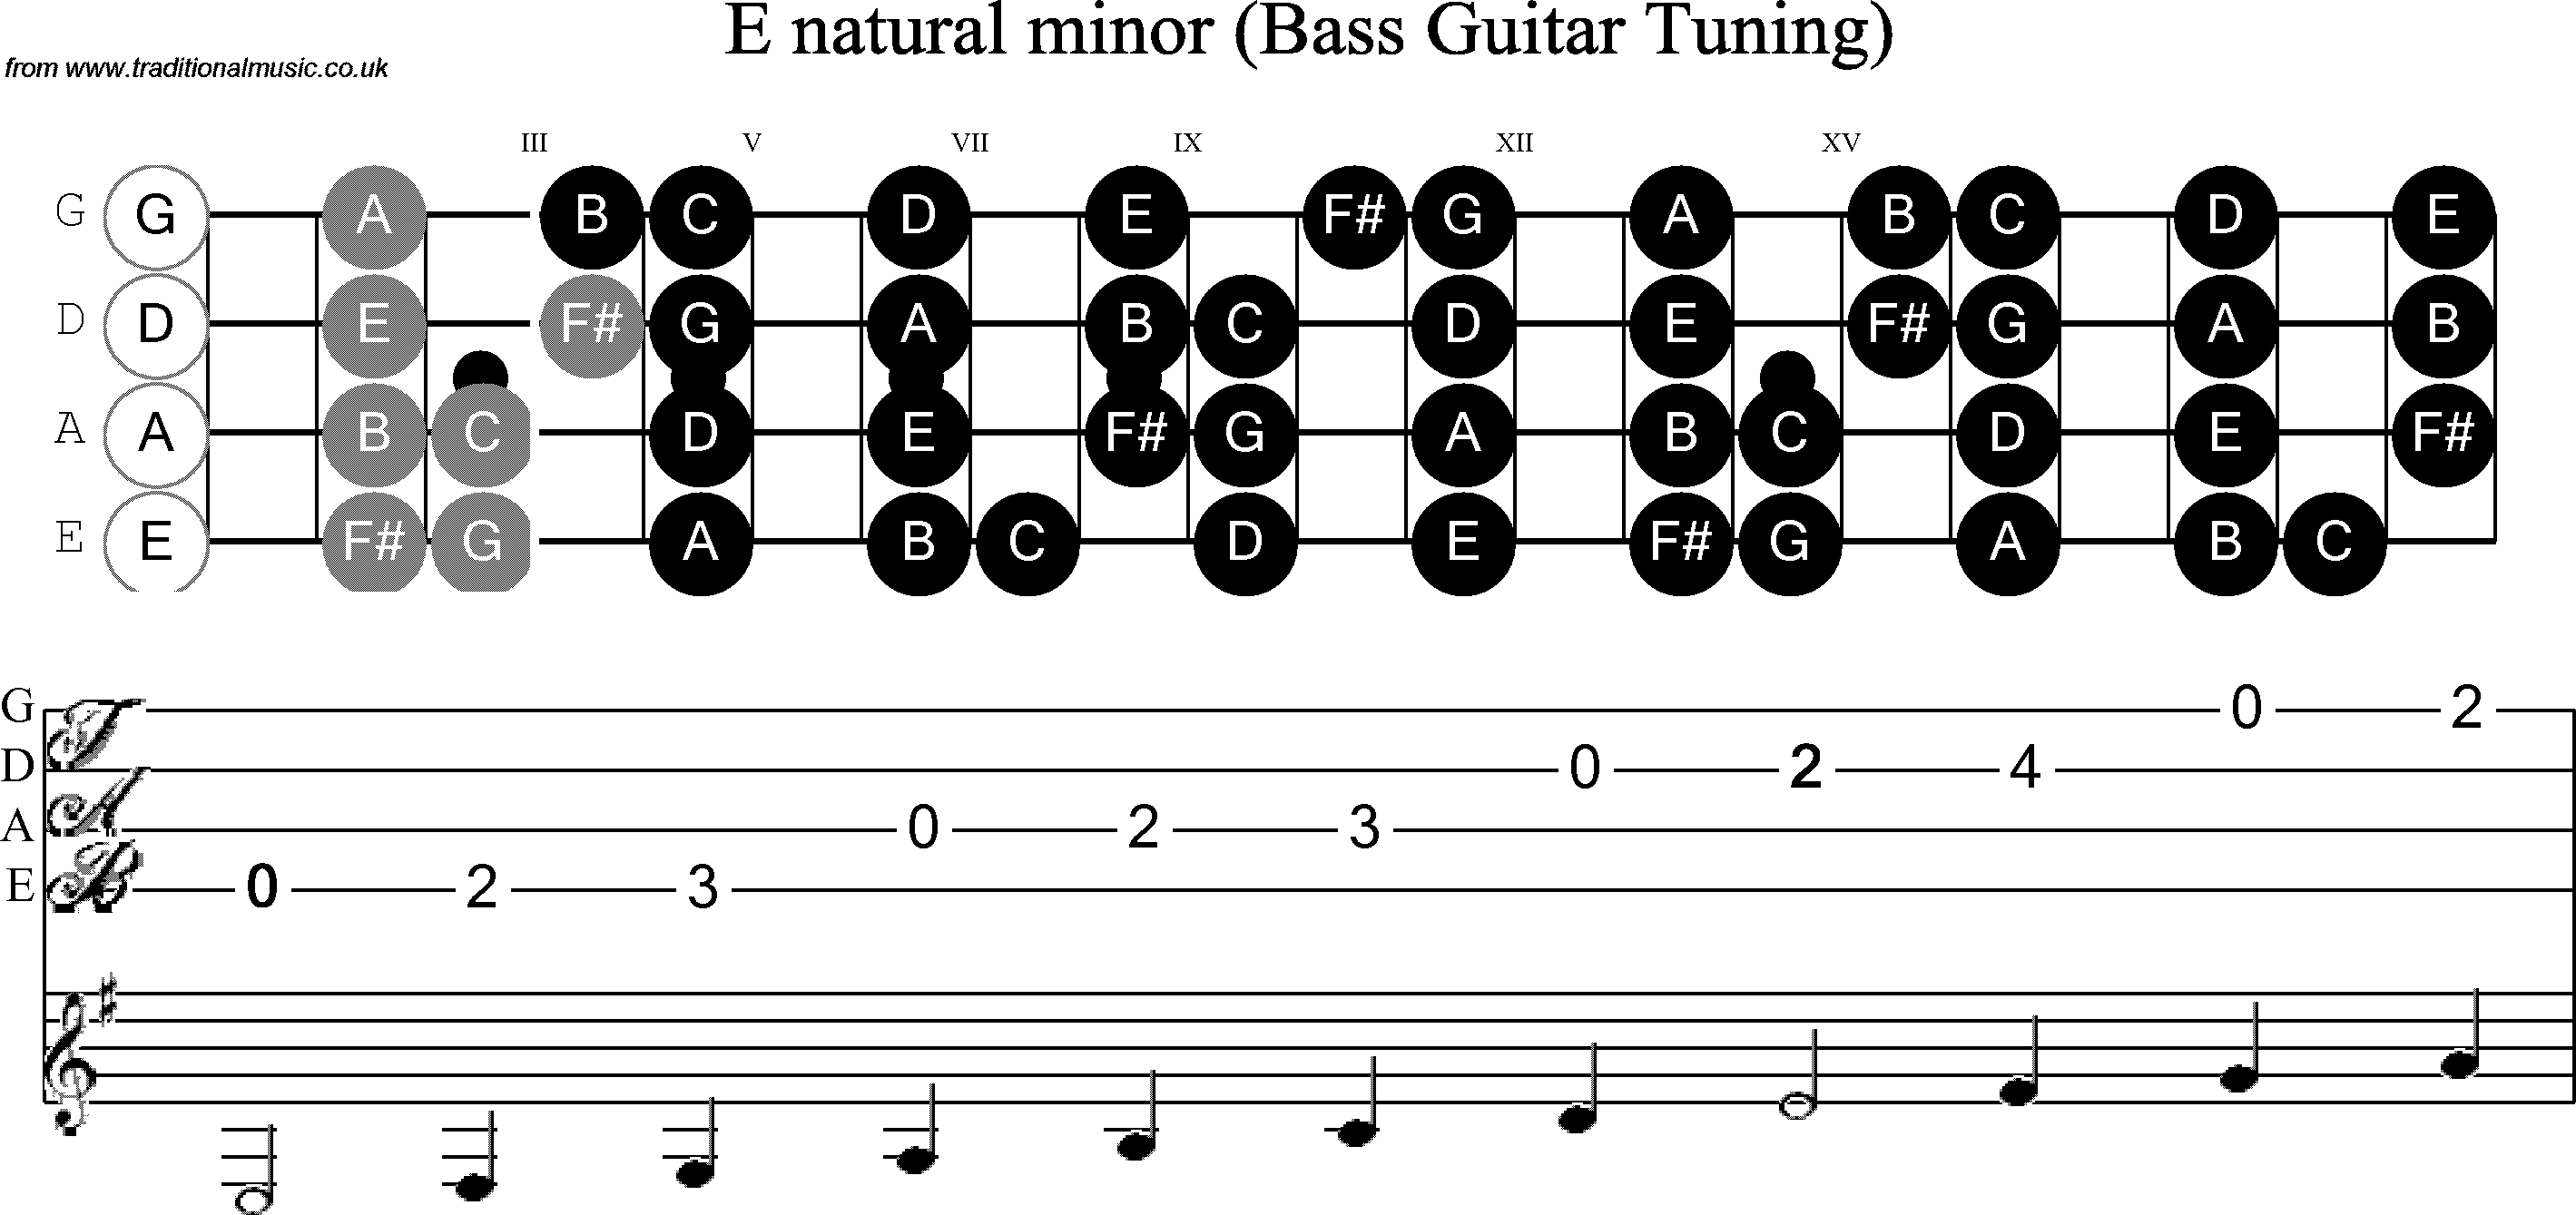 https://www.traditionalmusic.co.uk/scales/png/bass-scale-e-minor.png